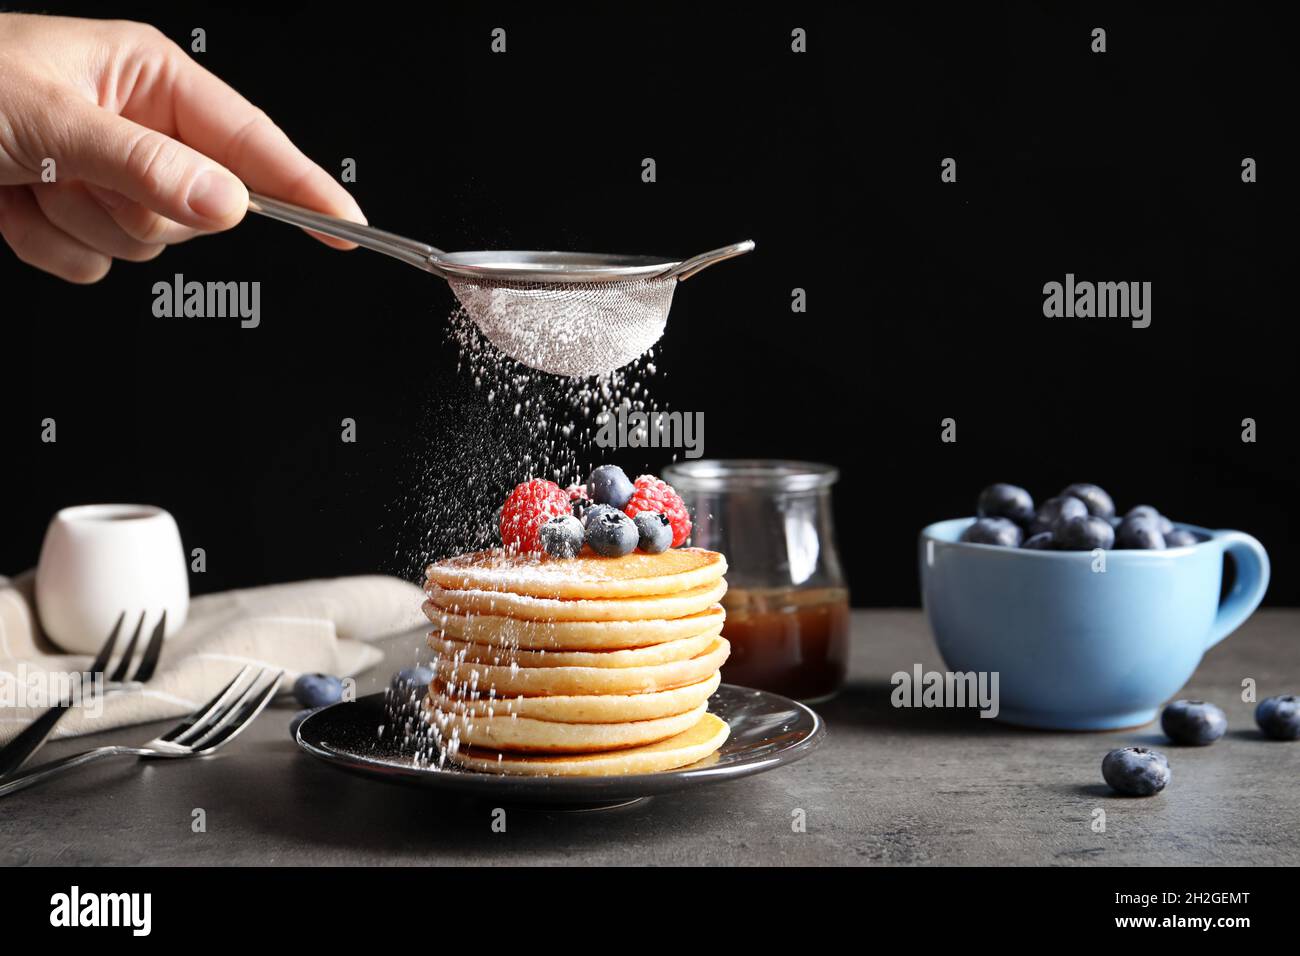 Woman adding sugar powder to tasty pancakes with berries on plate, closeup Stock Photo